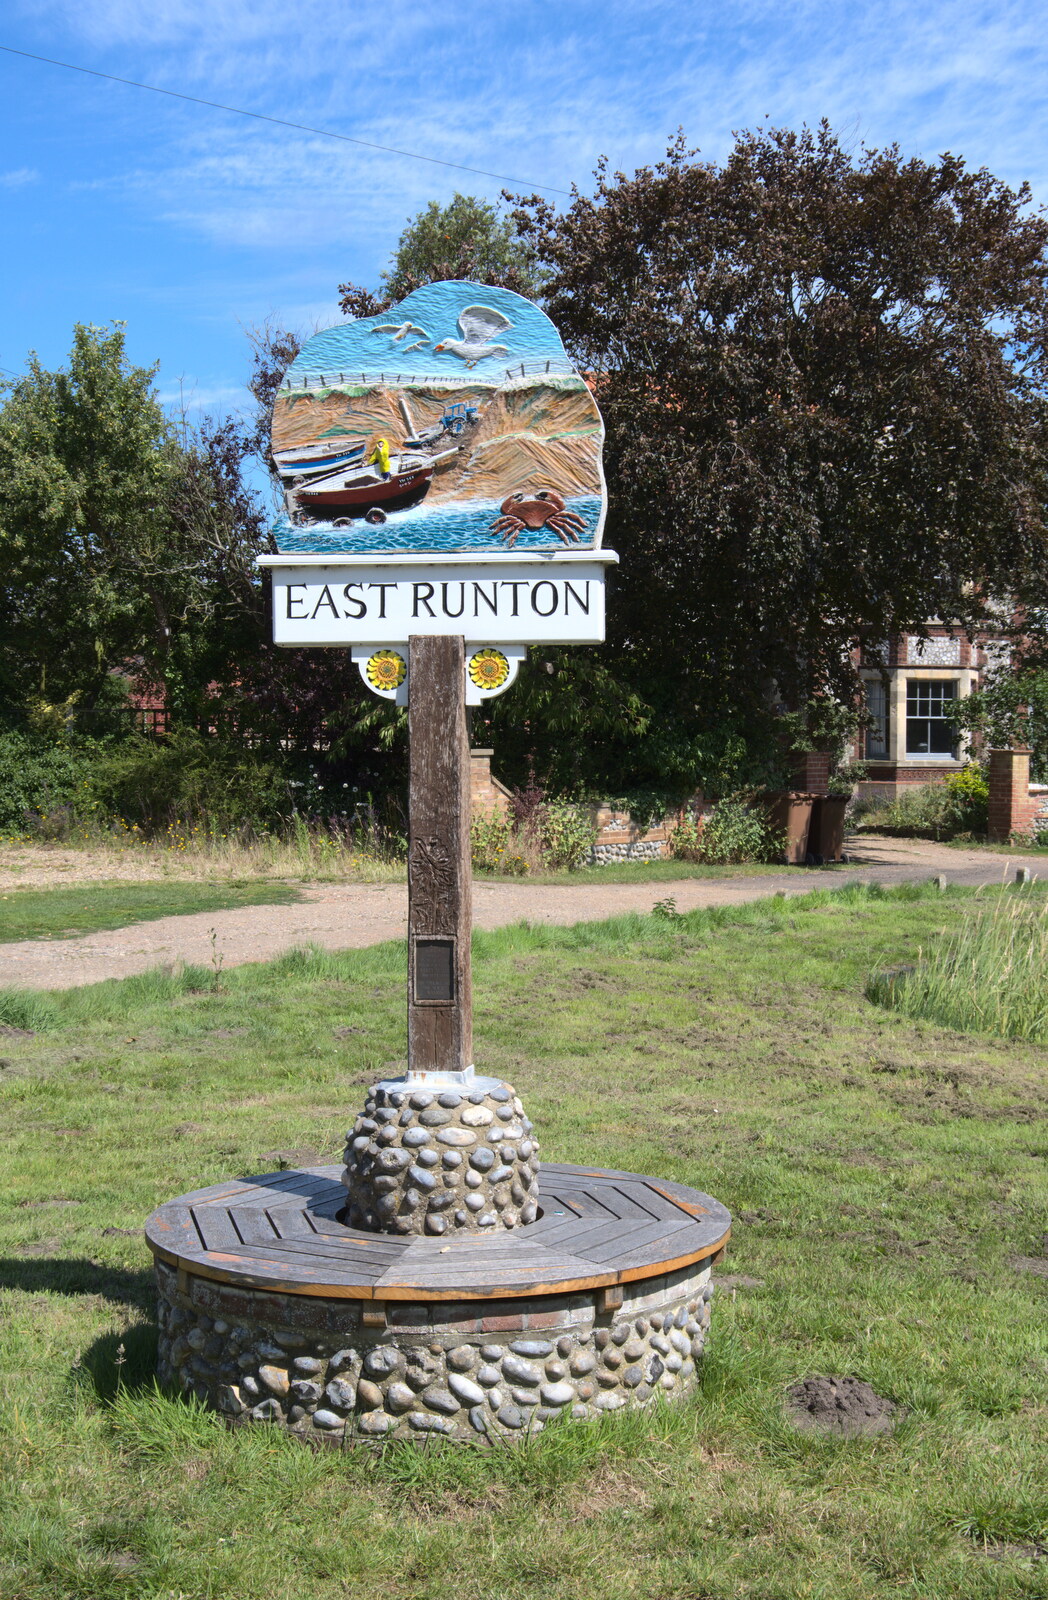 The East Runton sign from Camping on the Coast, East Runton, North Norfolk - 25th July 2020